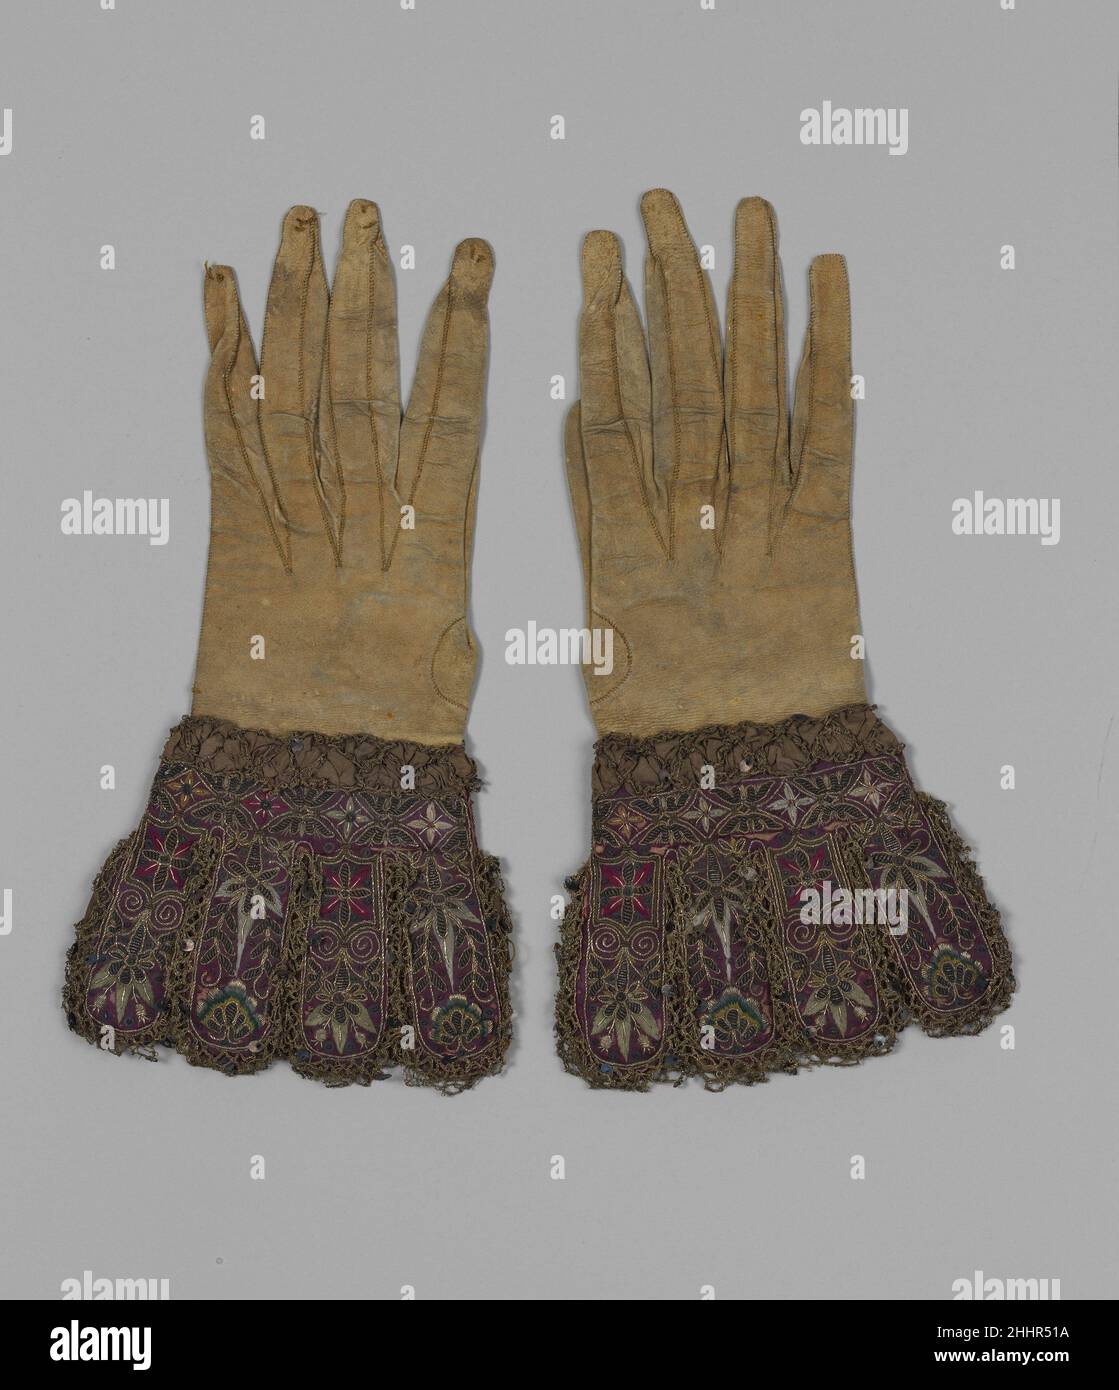 Pair of gloves first half 17th century British The highly skilled maker who executed these gloves chose an intricate design—floral yet geometric—that alludes to the more simple versions found in early seventeenth century pattern books. As scholars have pointed out, pattern books for needlework and lacemaking, which were marketed towards women of the middling classes, presented an opportunity for upward mobility at a time when wealth was partially measured in fine possessions. The elite classes might hire artists and professionals to design and carry out, and thus distinguish their own embroide Stock Photo